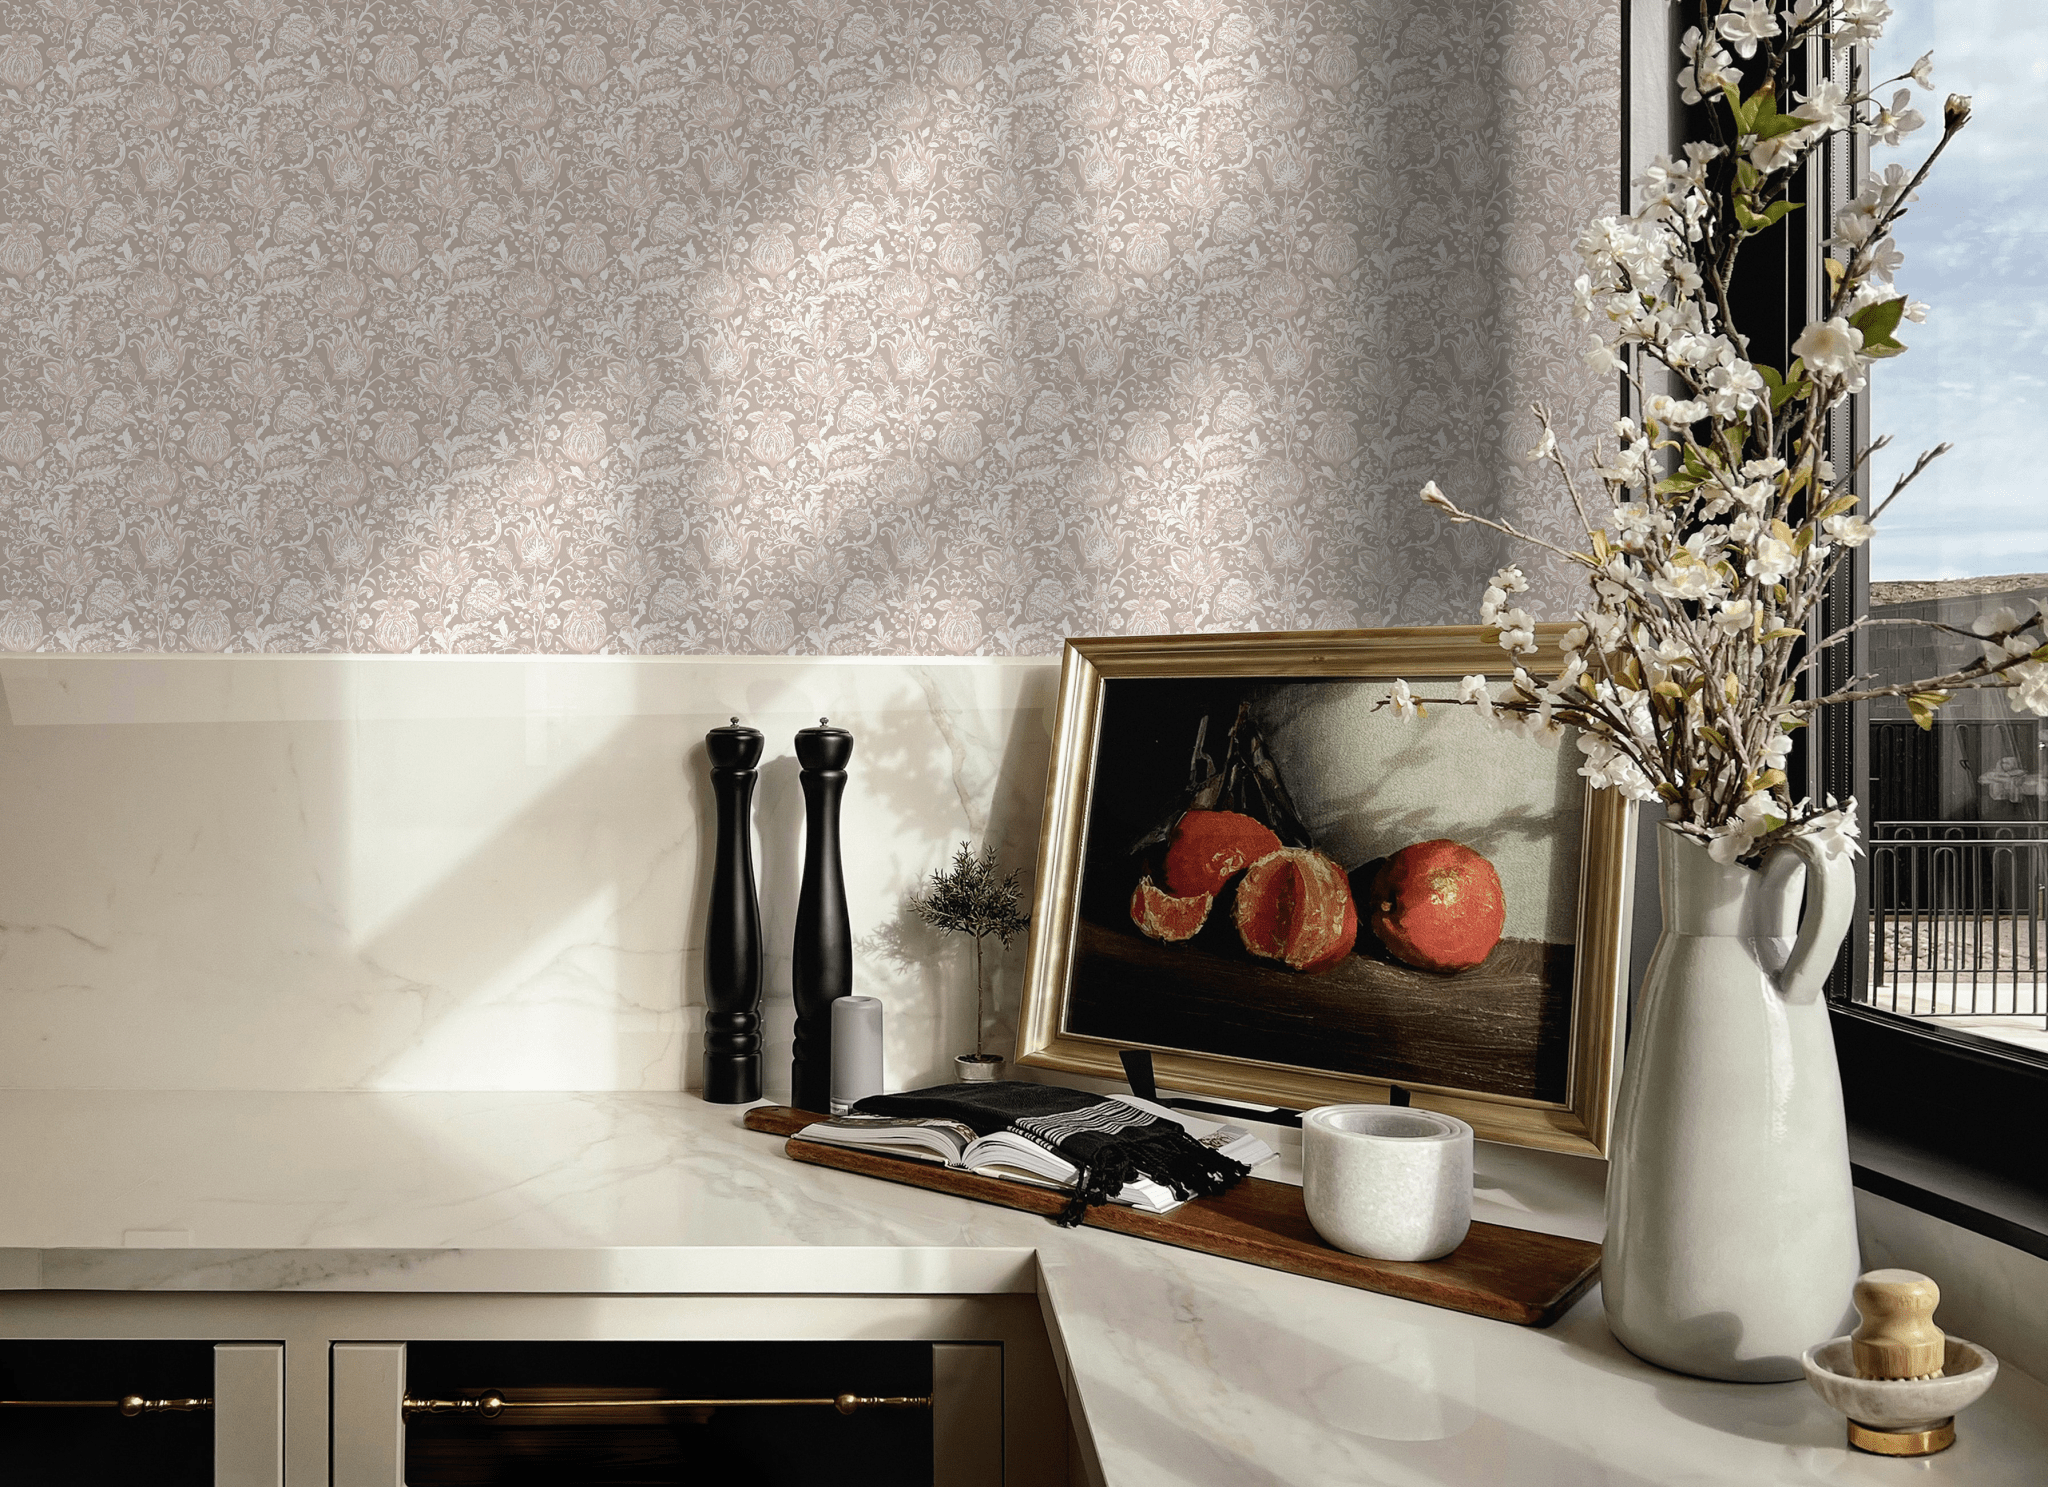 Kitchen accent wall with embellished blossom wallpaper, presenting a delicate floral pattern in soft neutral tones.